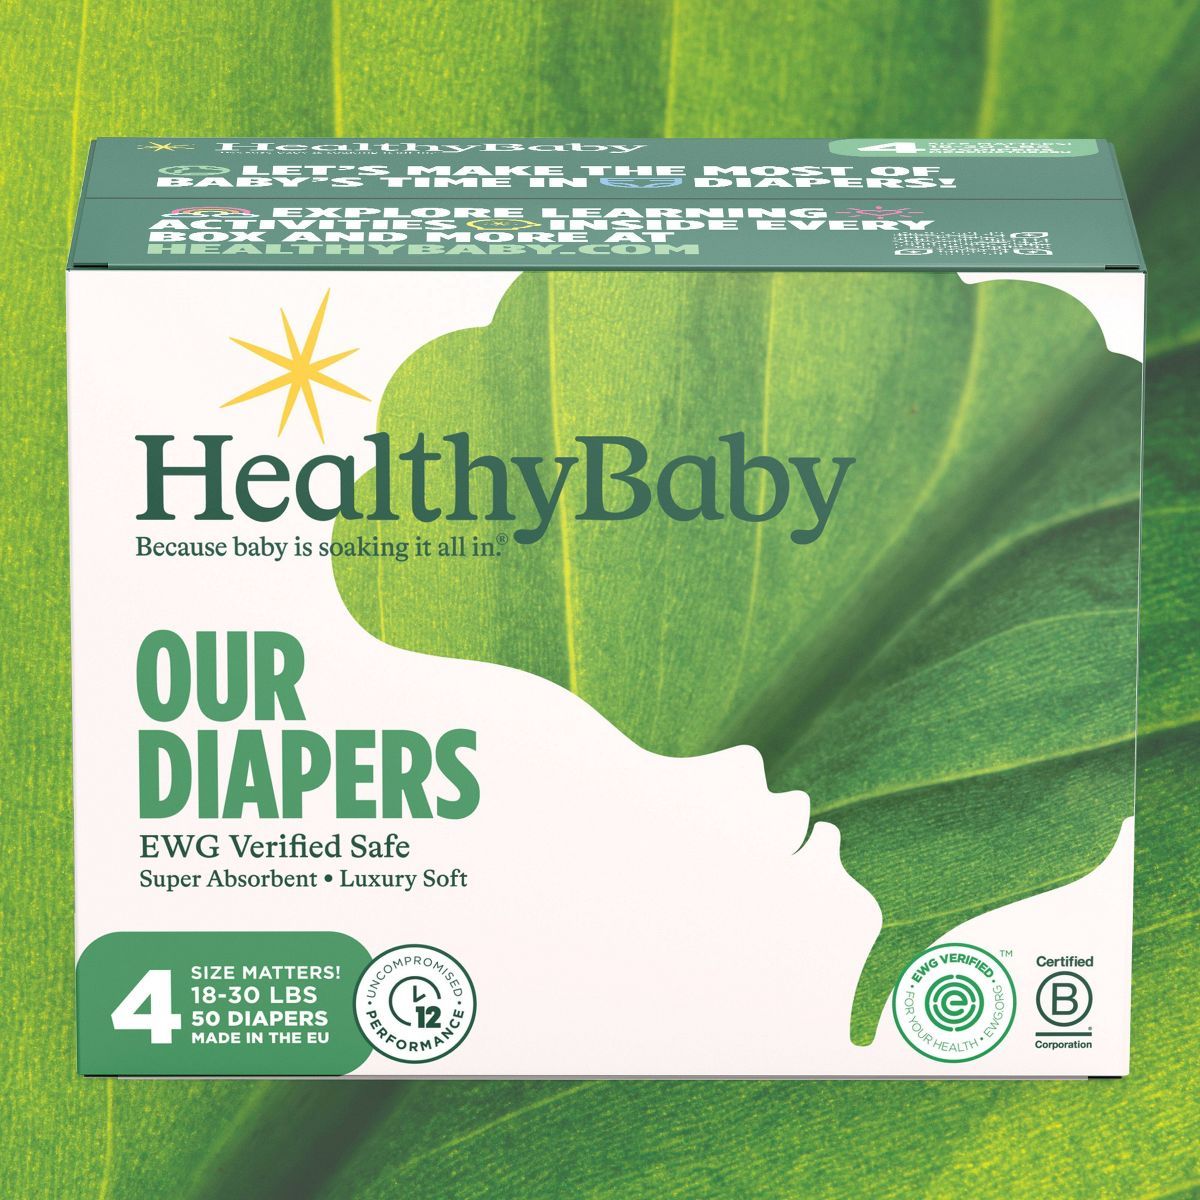 HealthyBaby Diapers | Target